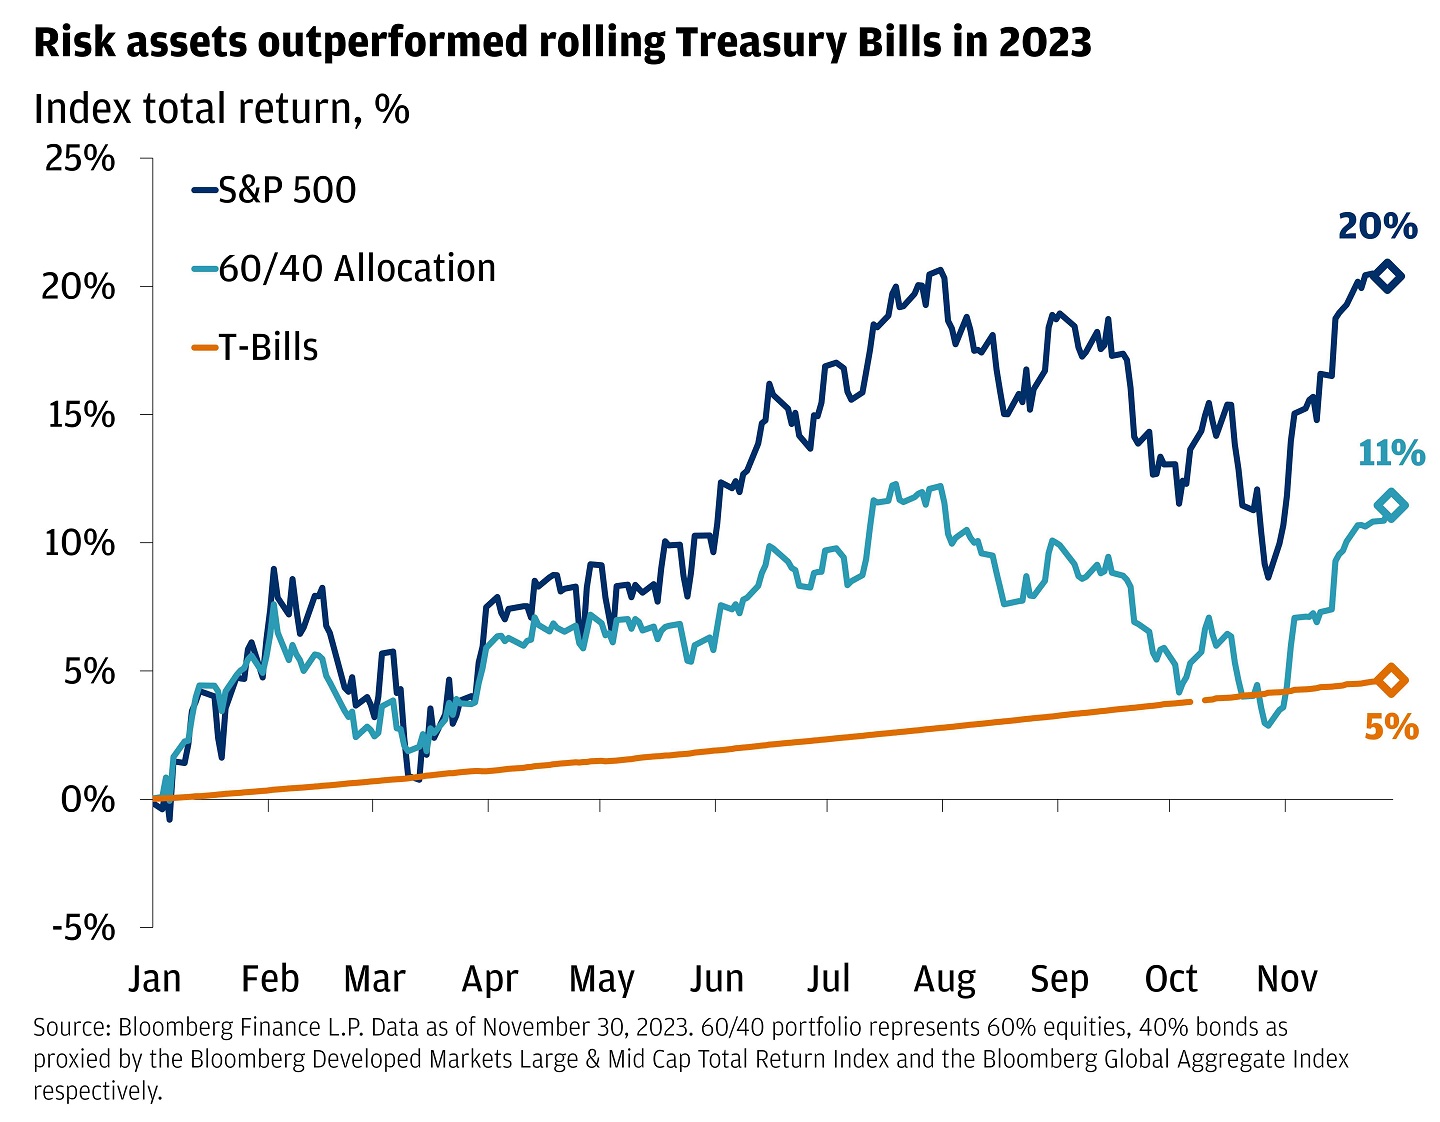 This graph shows the risk assets outperformed rolling Treasury Bills in 2023.